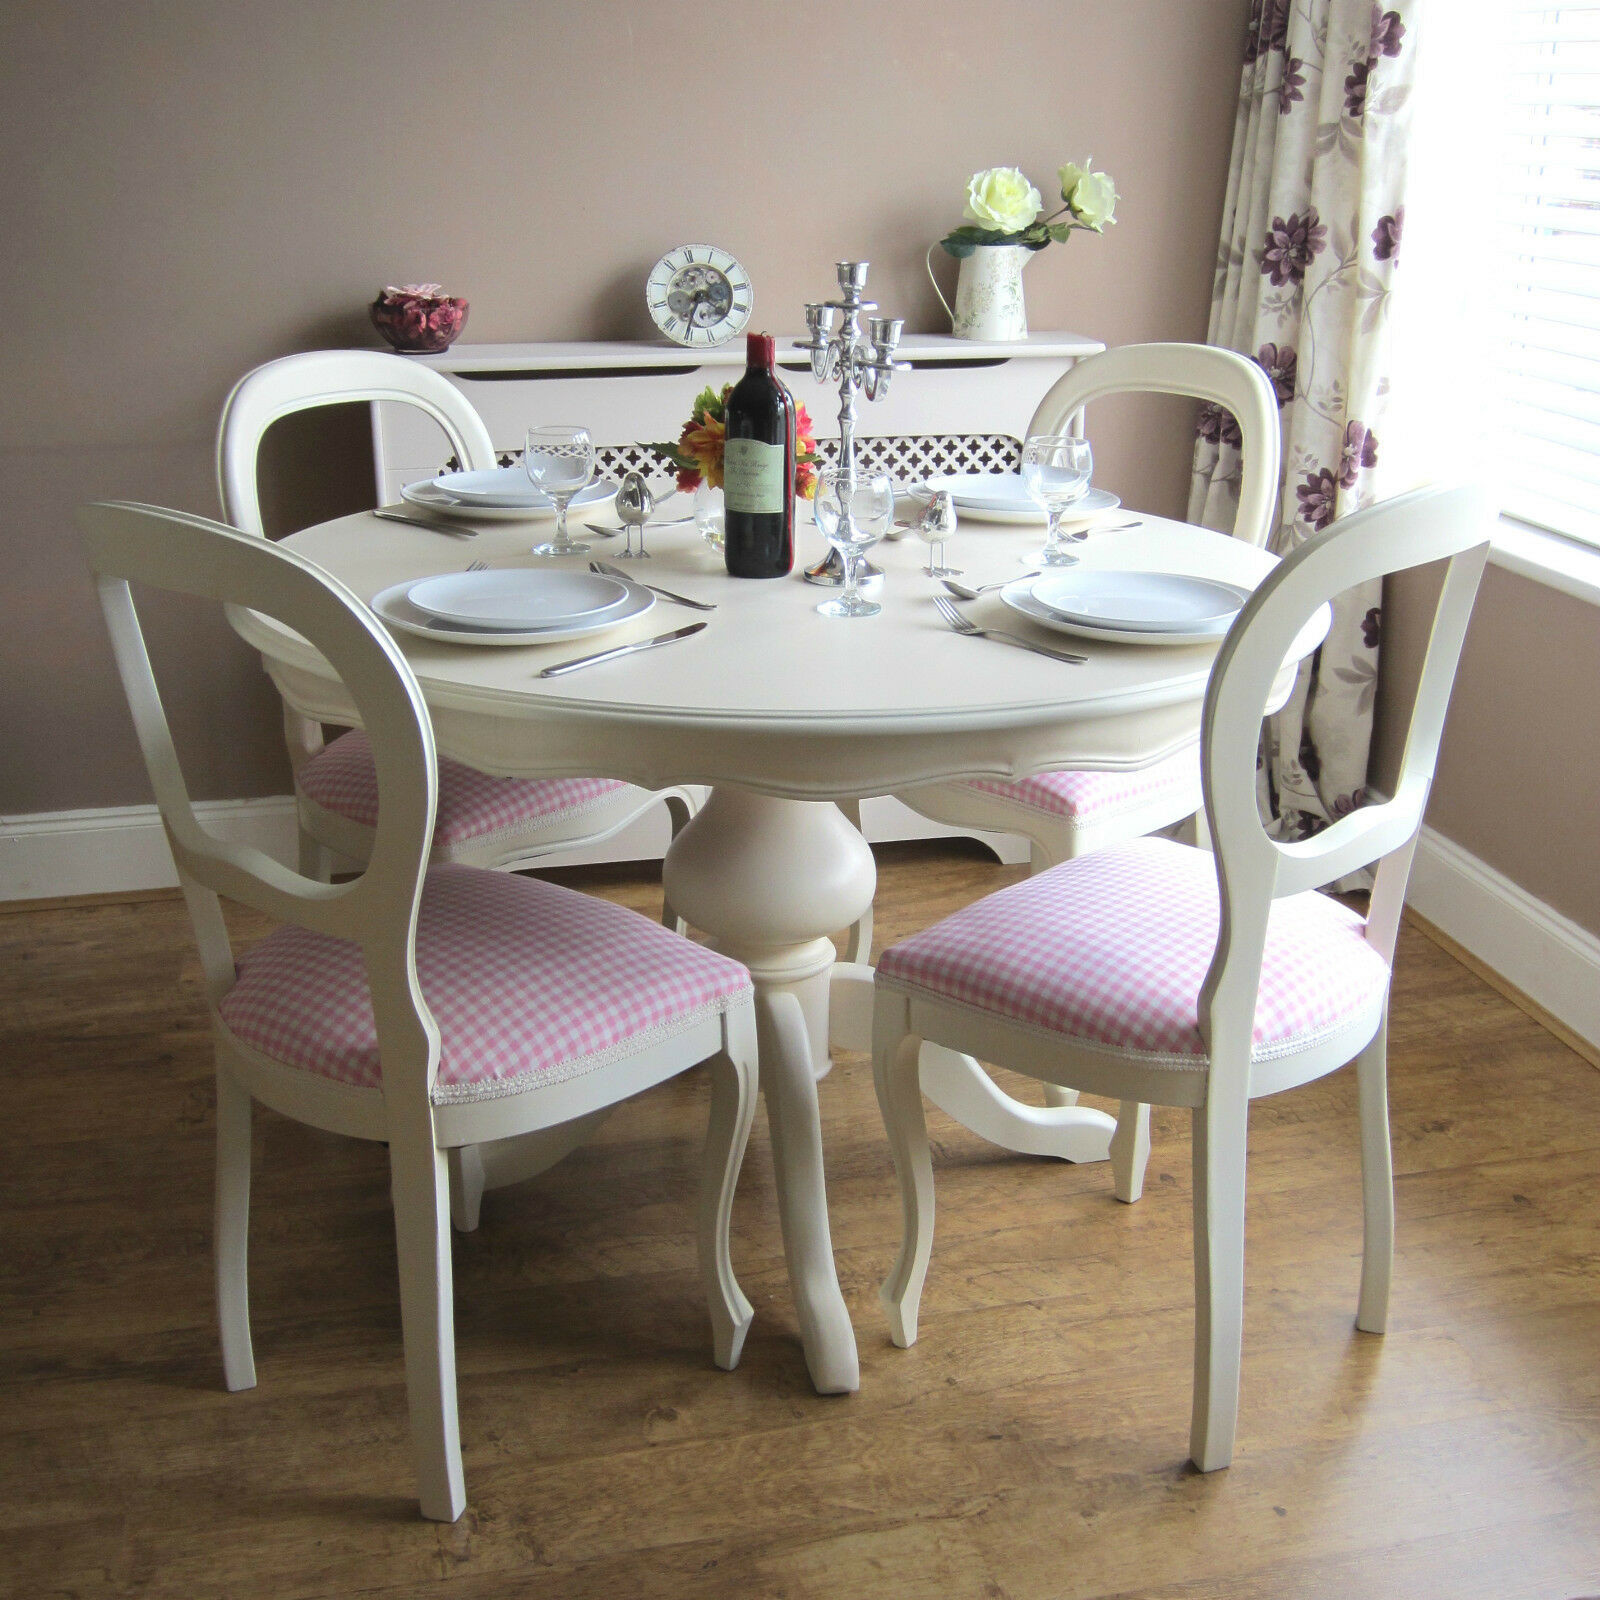 Best ideas about Shabby Chic Table
. Save or Pin Shabby Chic Table and Chairs Now.